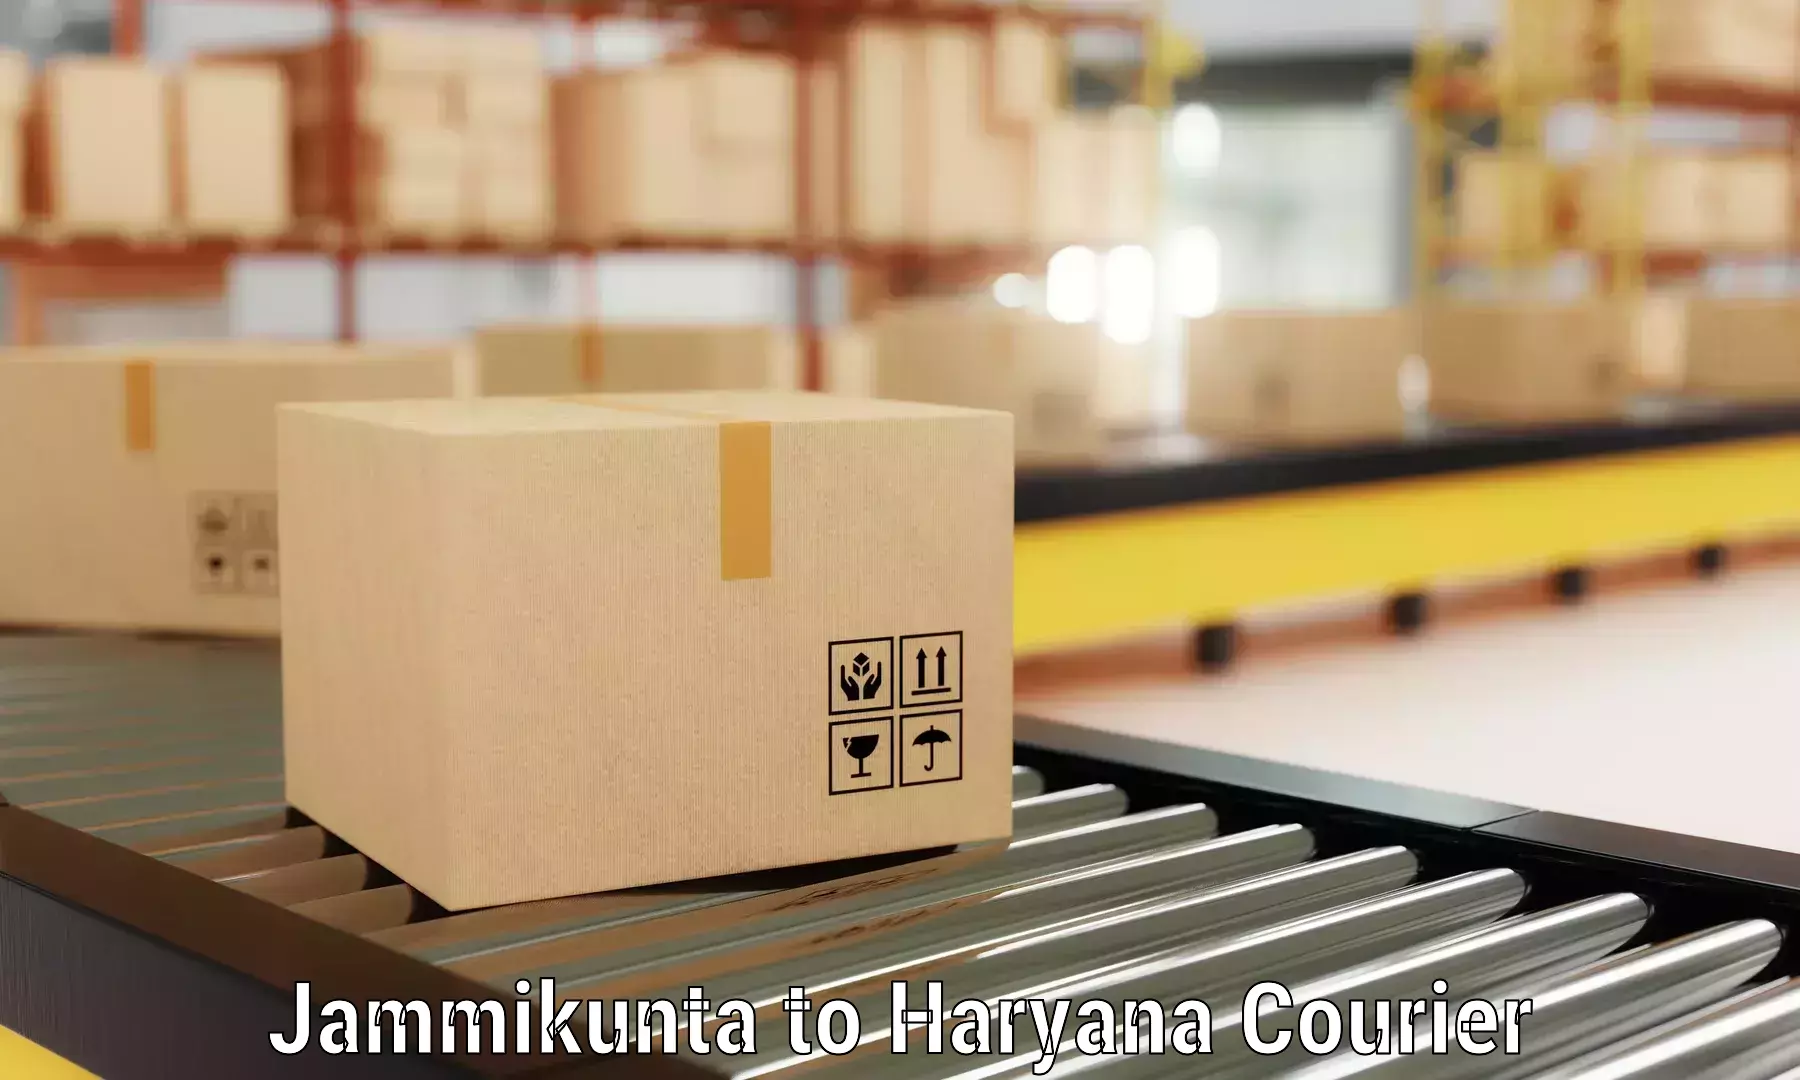 Moving and packing experts Jammikunta to NCR Haryana